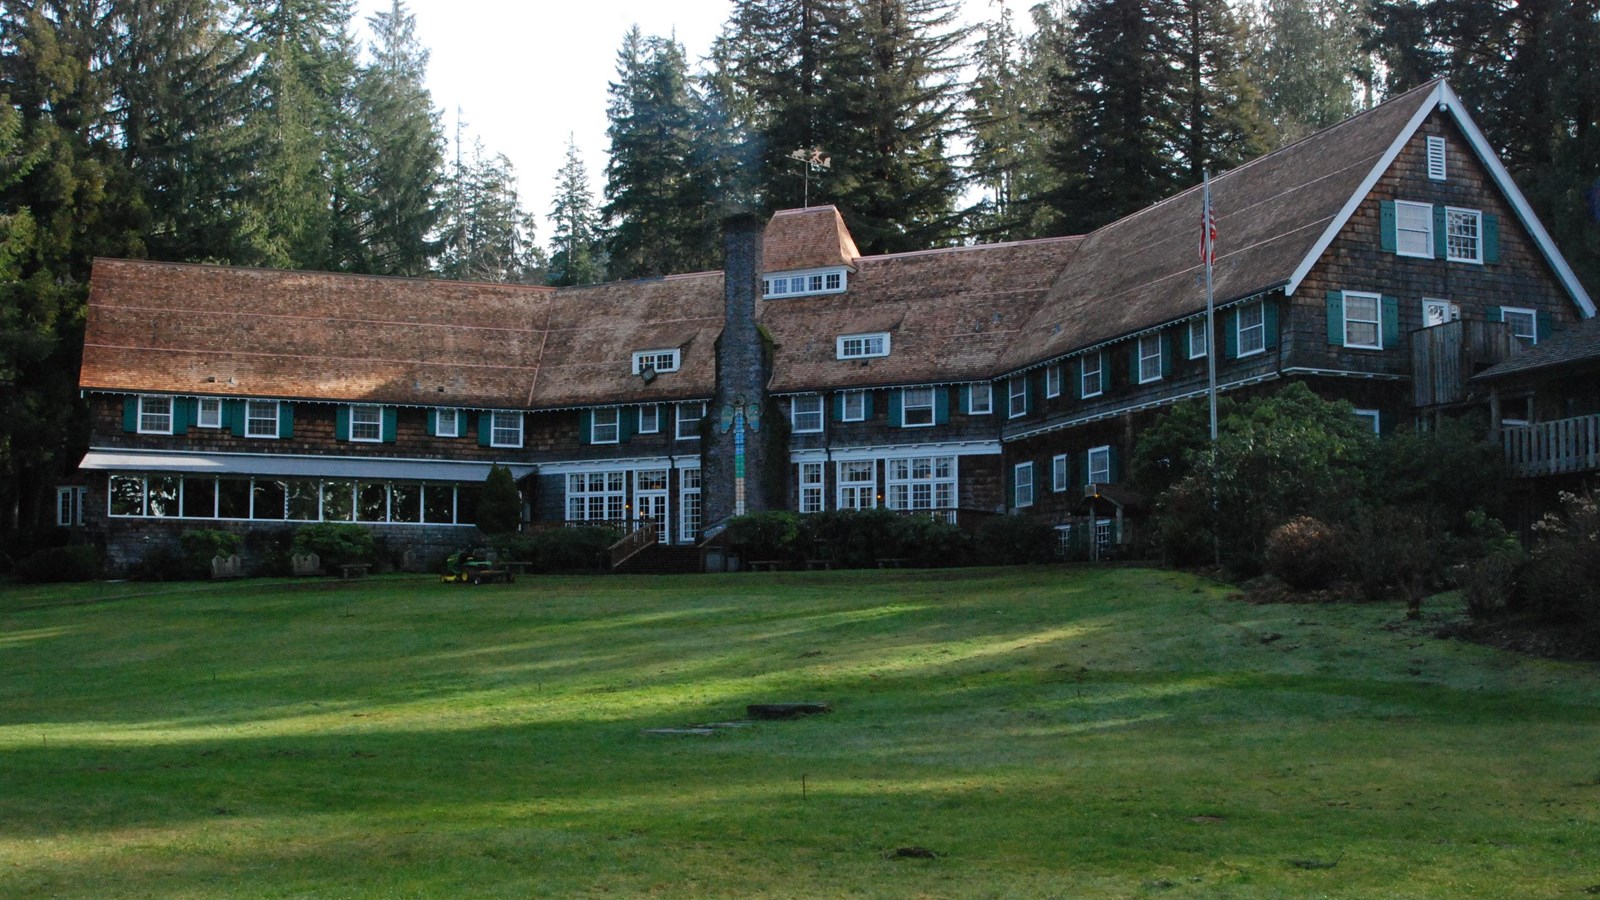 A large wooden lodge building with a sprawling lawn.